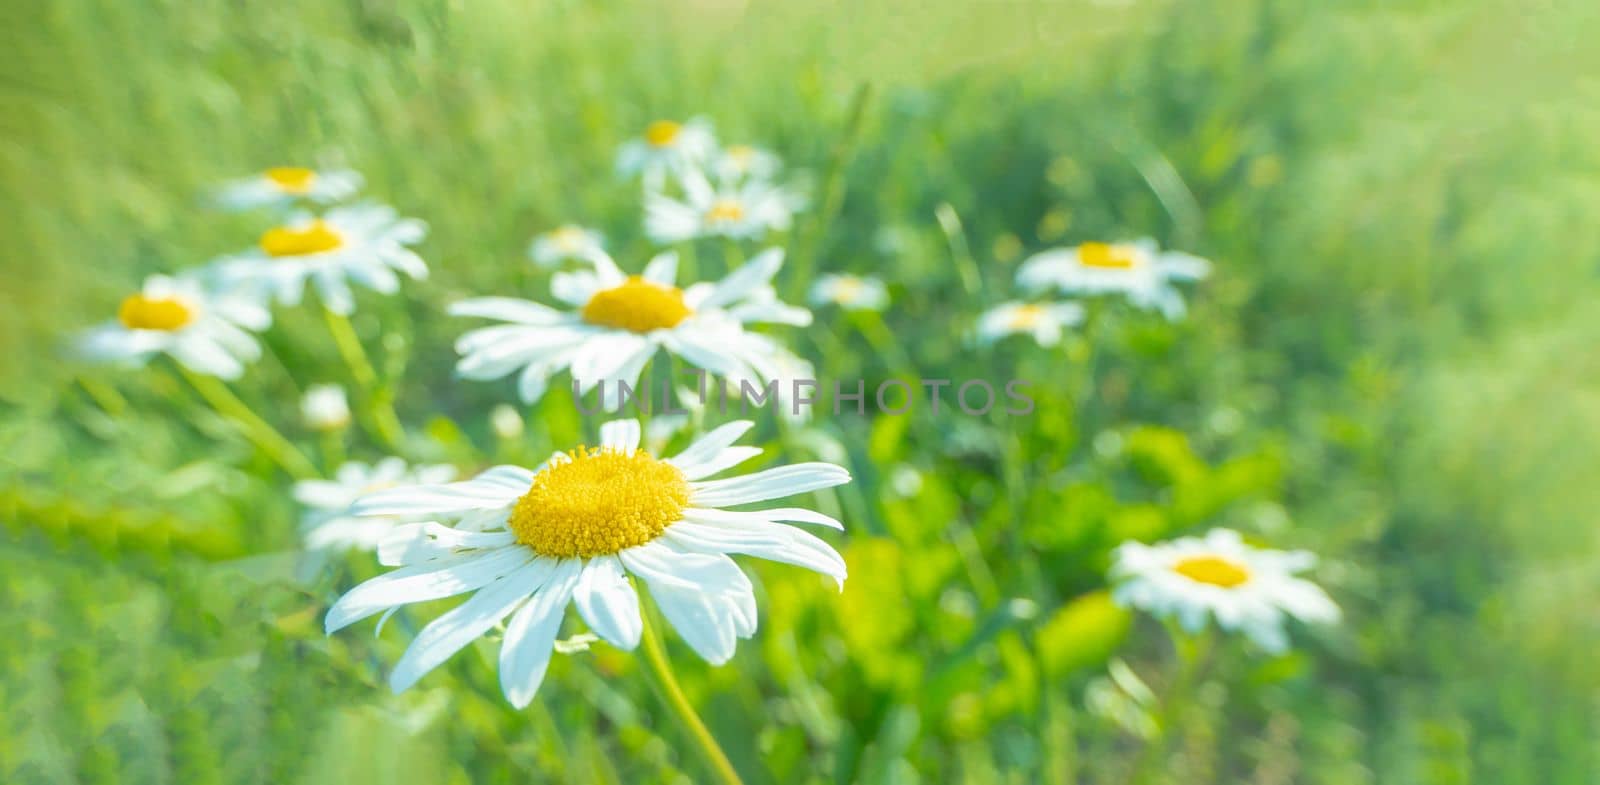 Blooming daisies in the sun on a blurry background of grass by kajasja